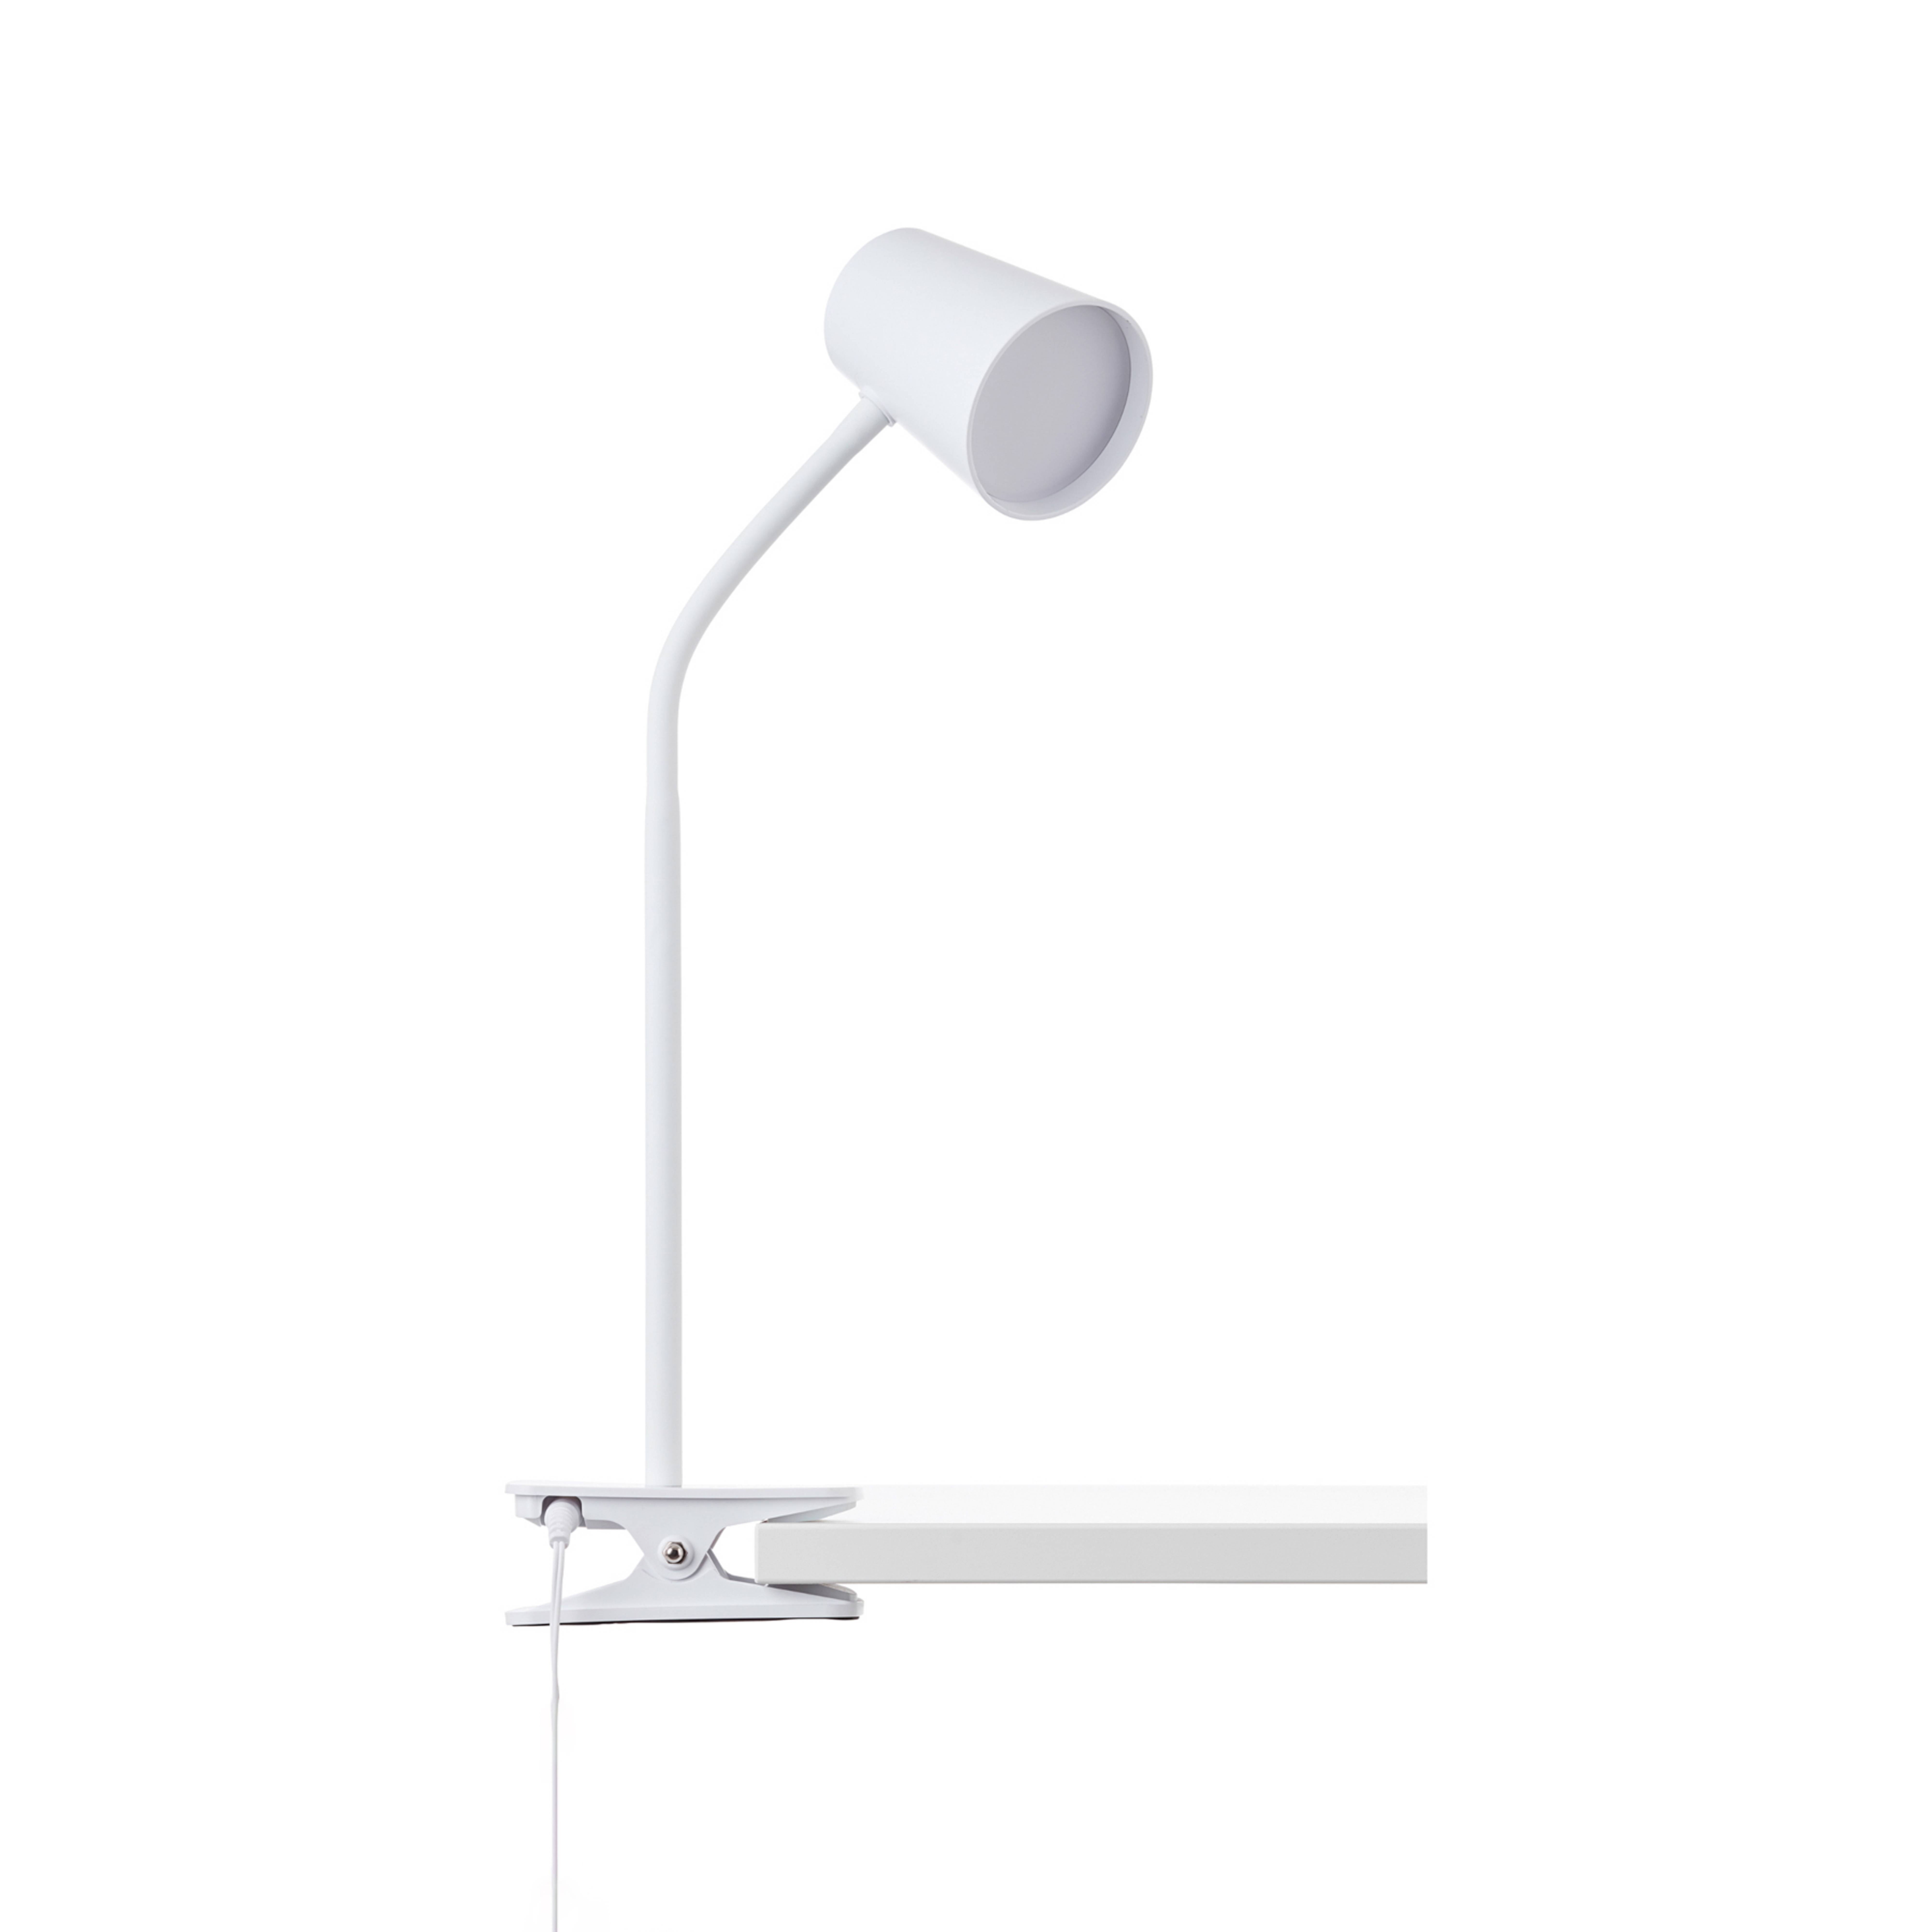 Lampe à poser LED Adda blanc dimmable